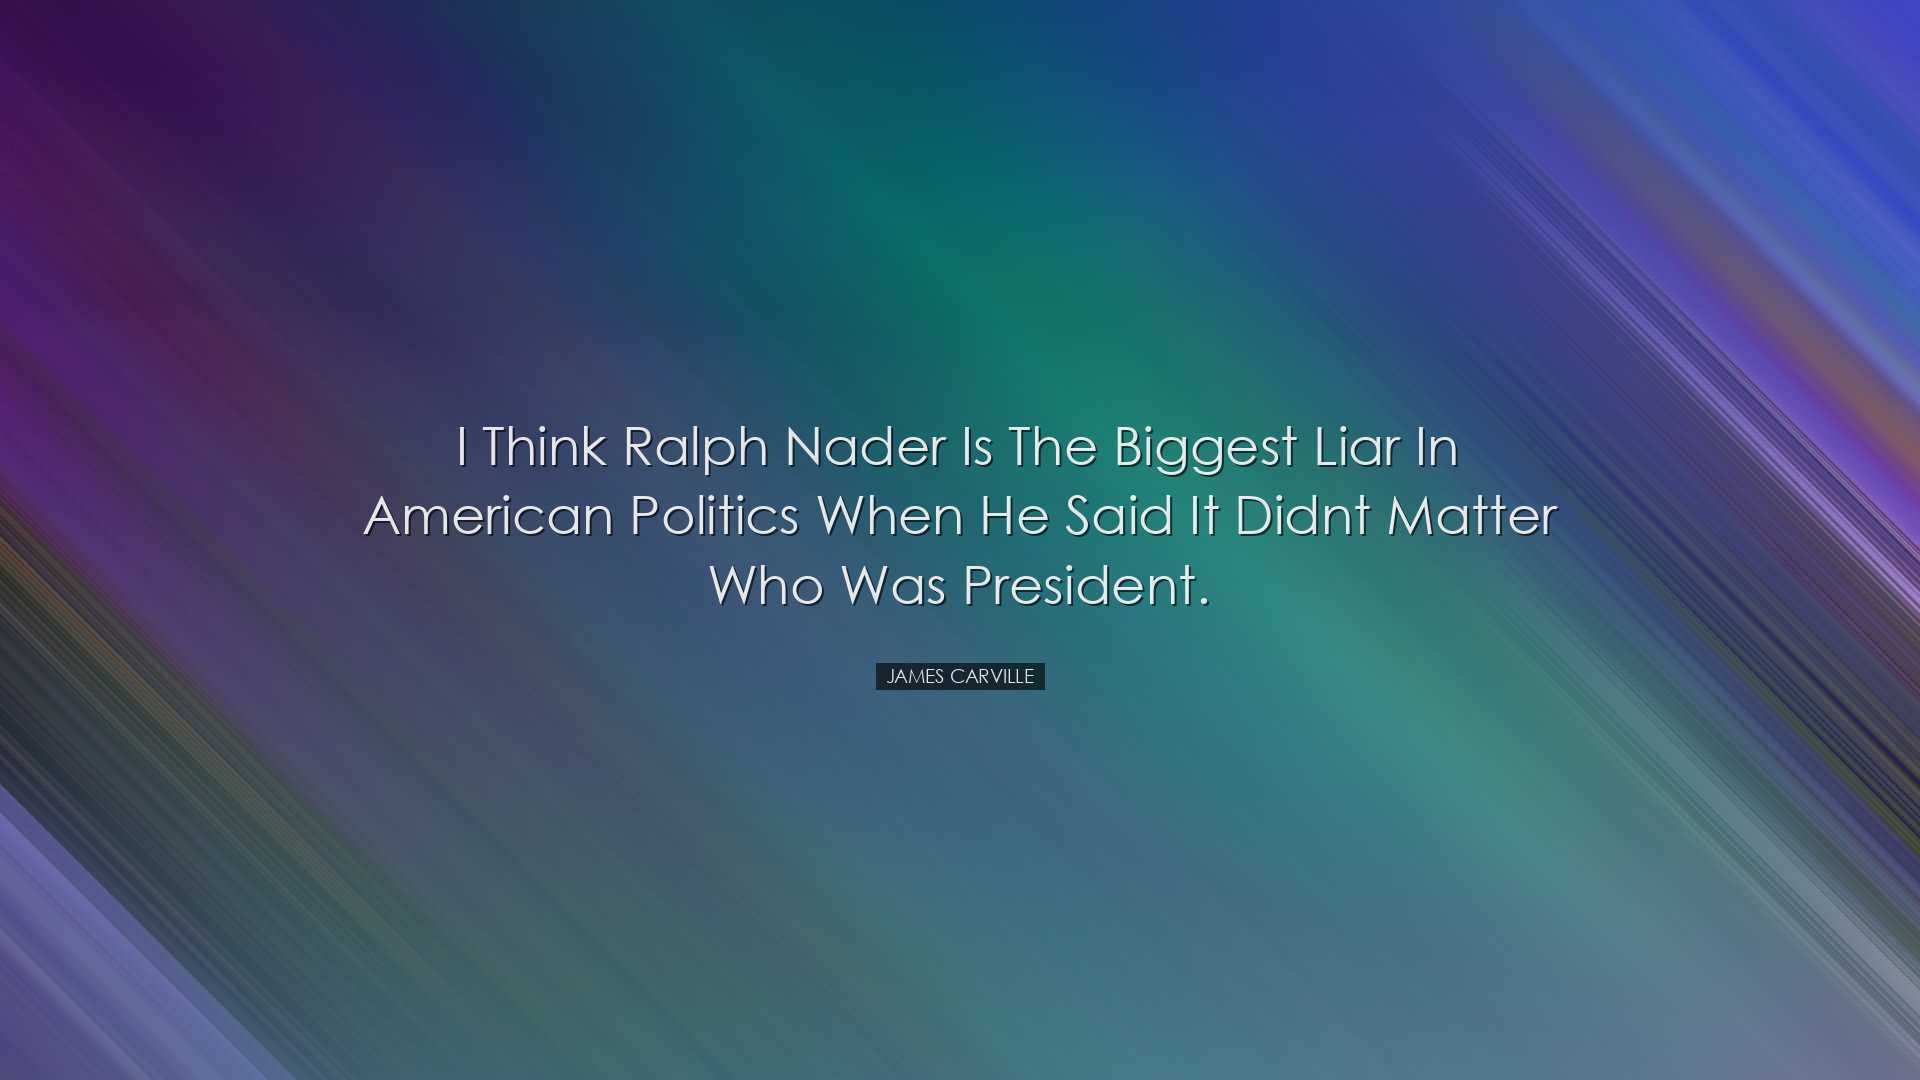 I think Ralph Nader is the biggest liar in American politics when